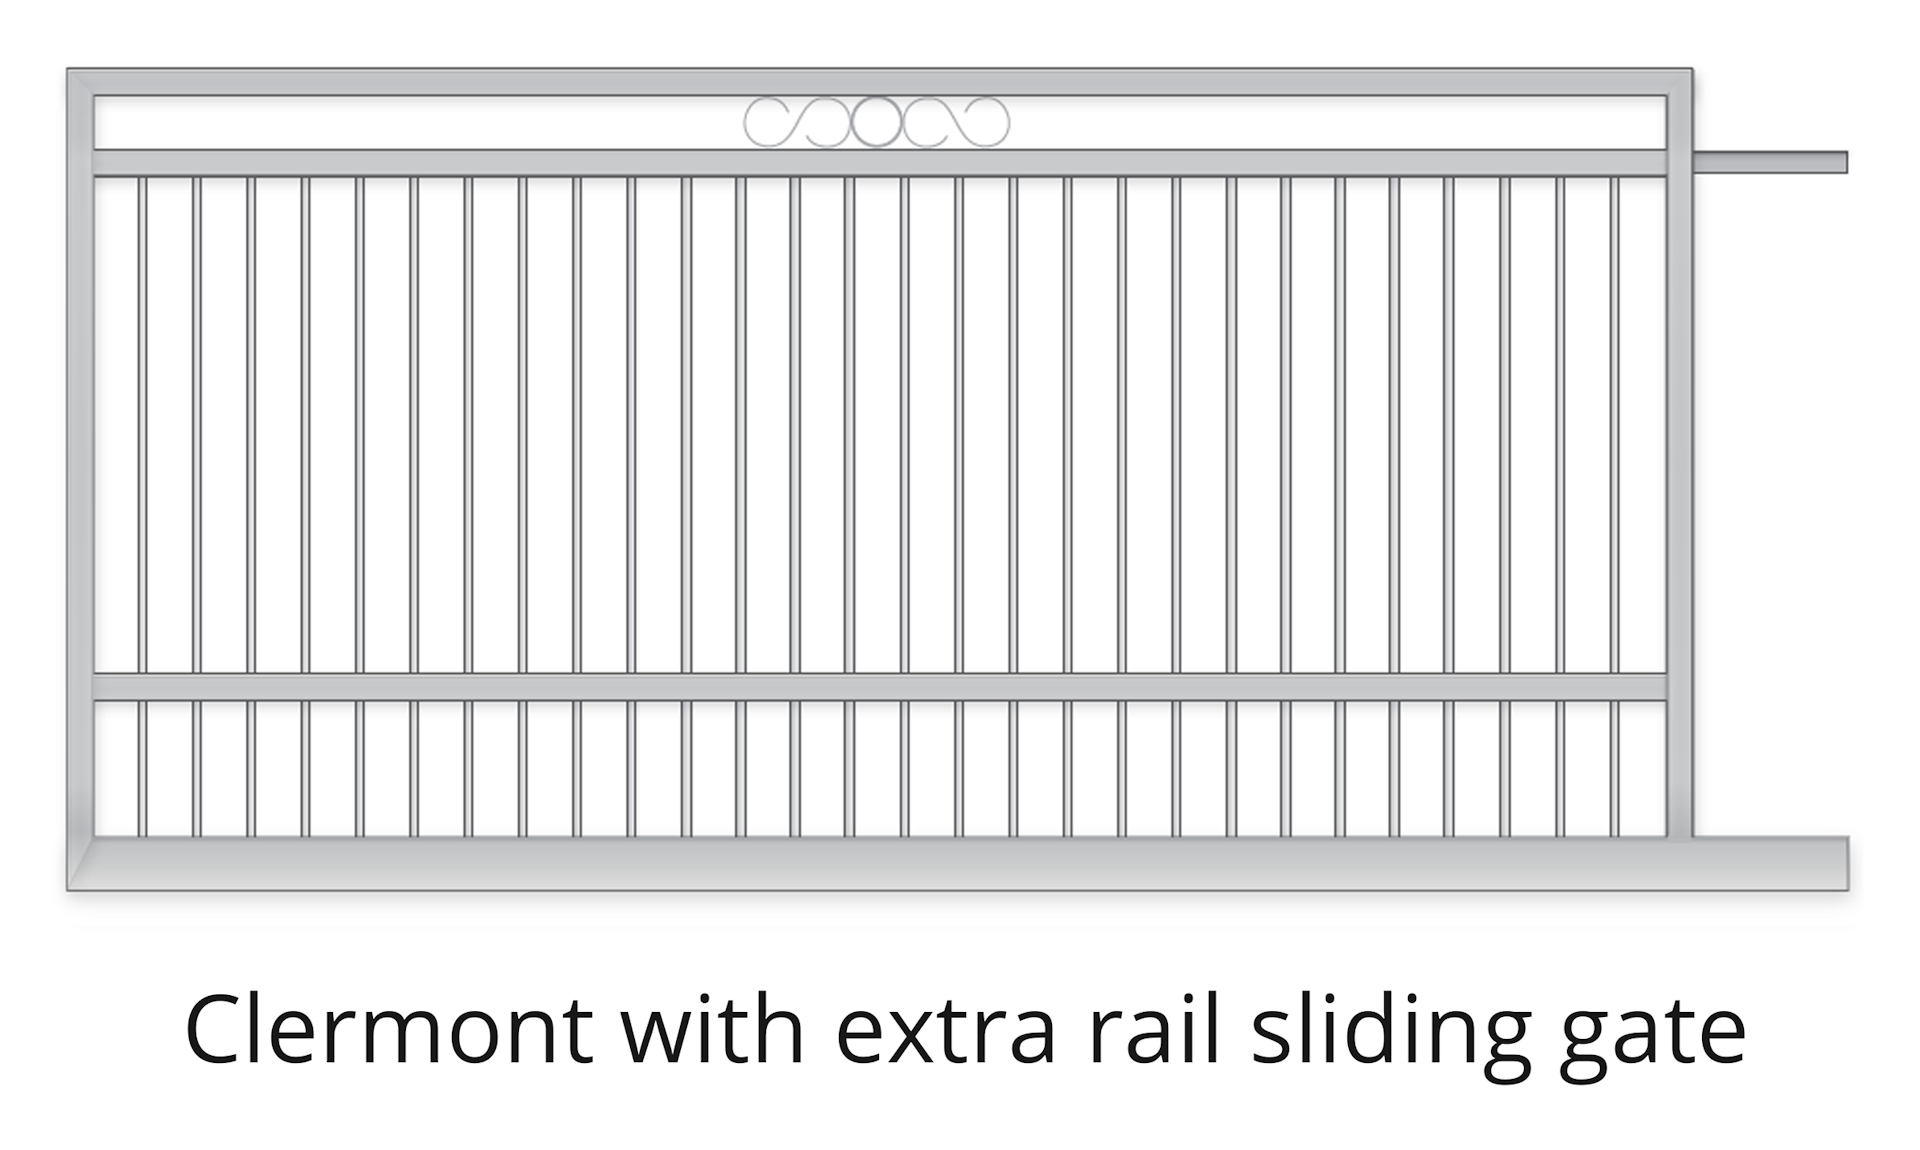 Standard Gate - Style Clermont with extra rail sliding gate